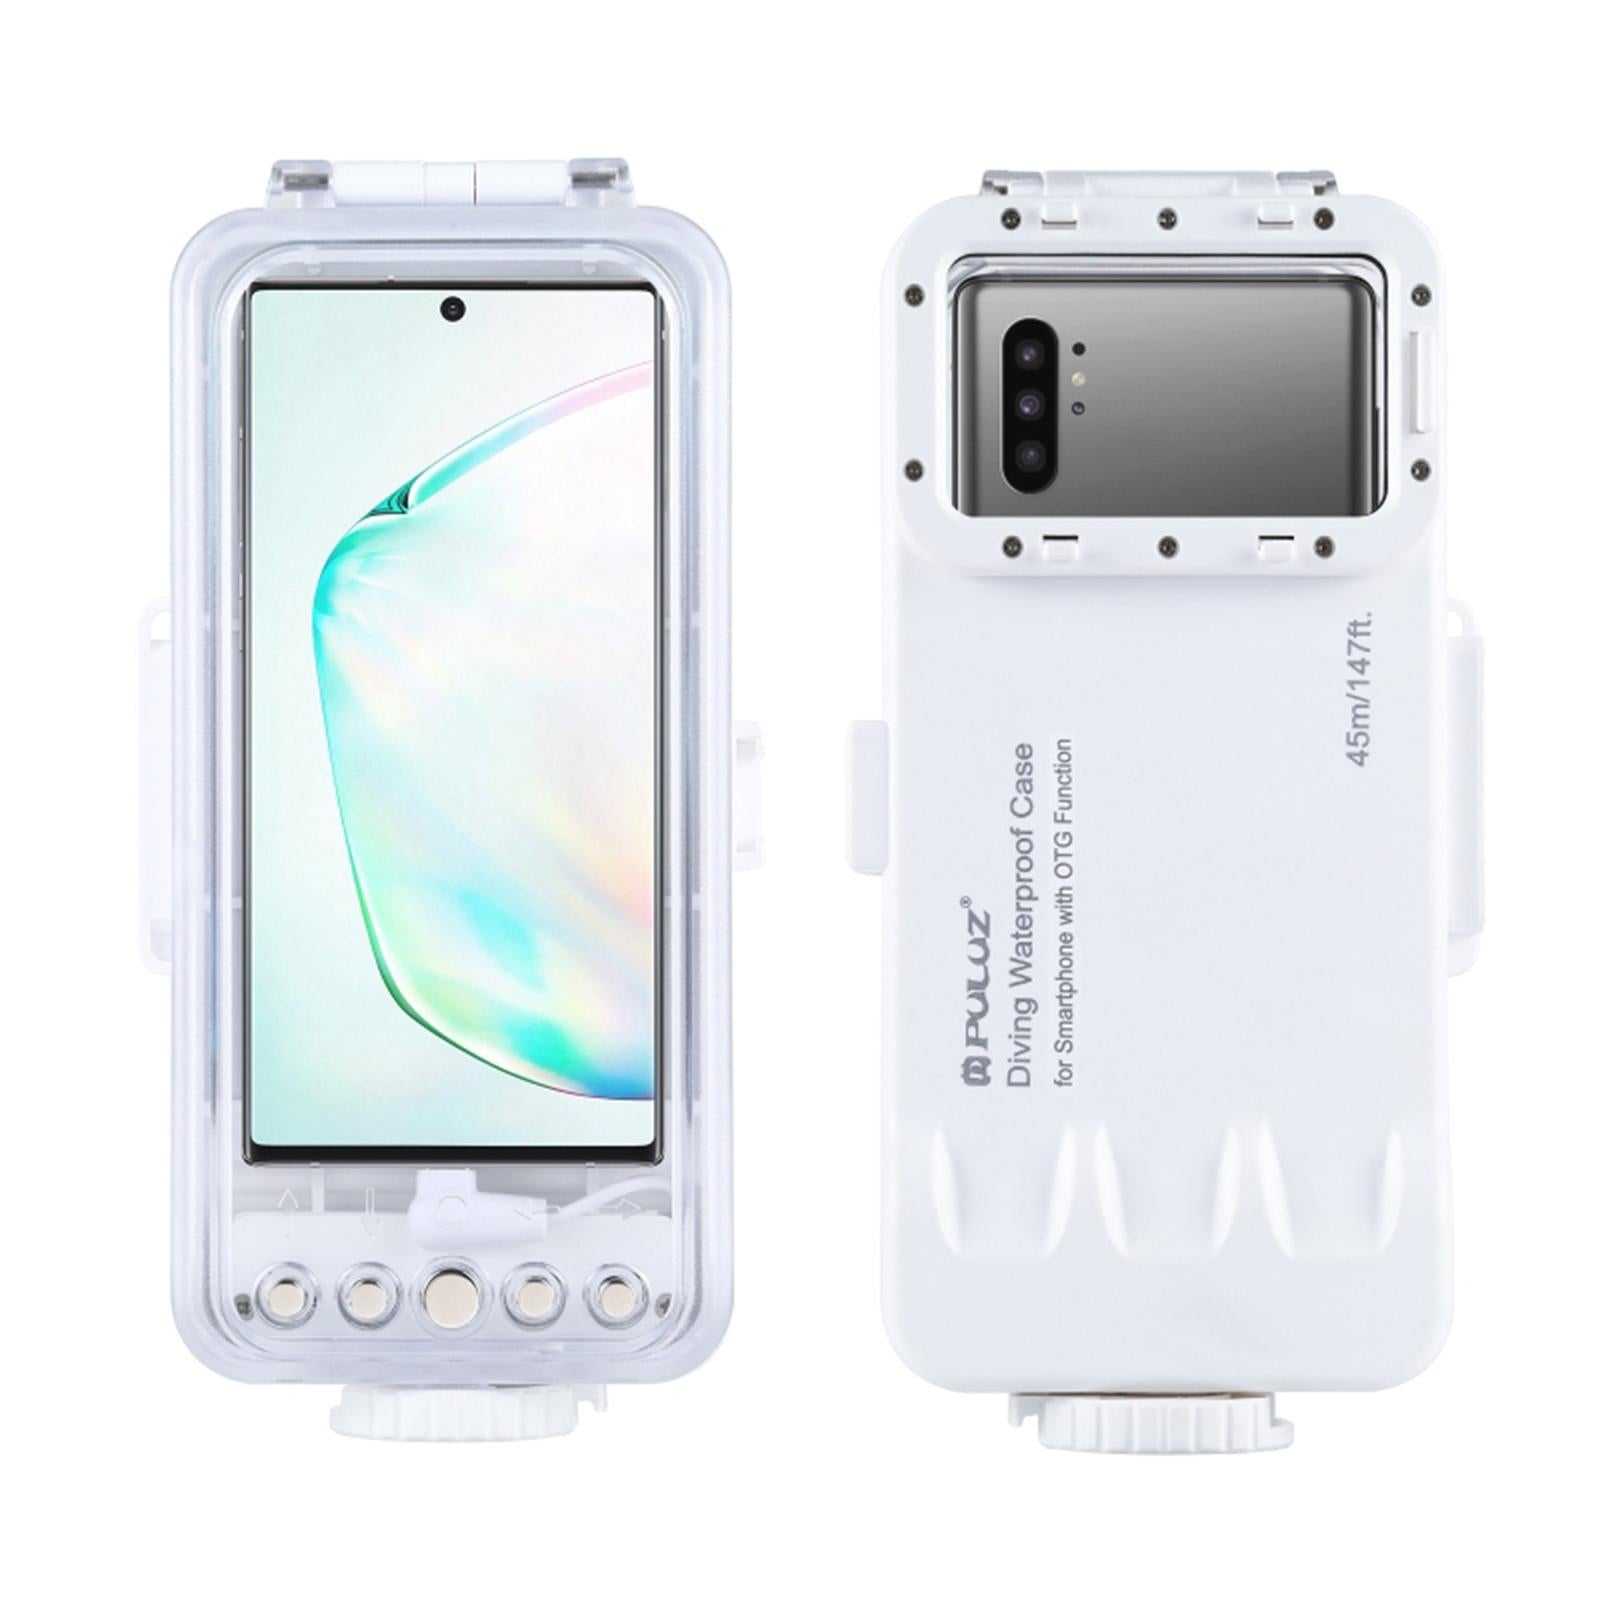 Waterproof Diving Cover Underwater Case for Android OTG Smartphones Clear